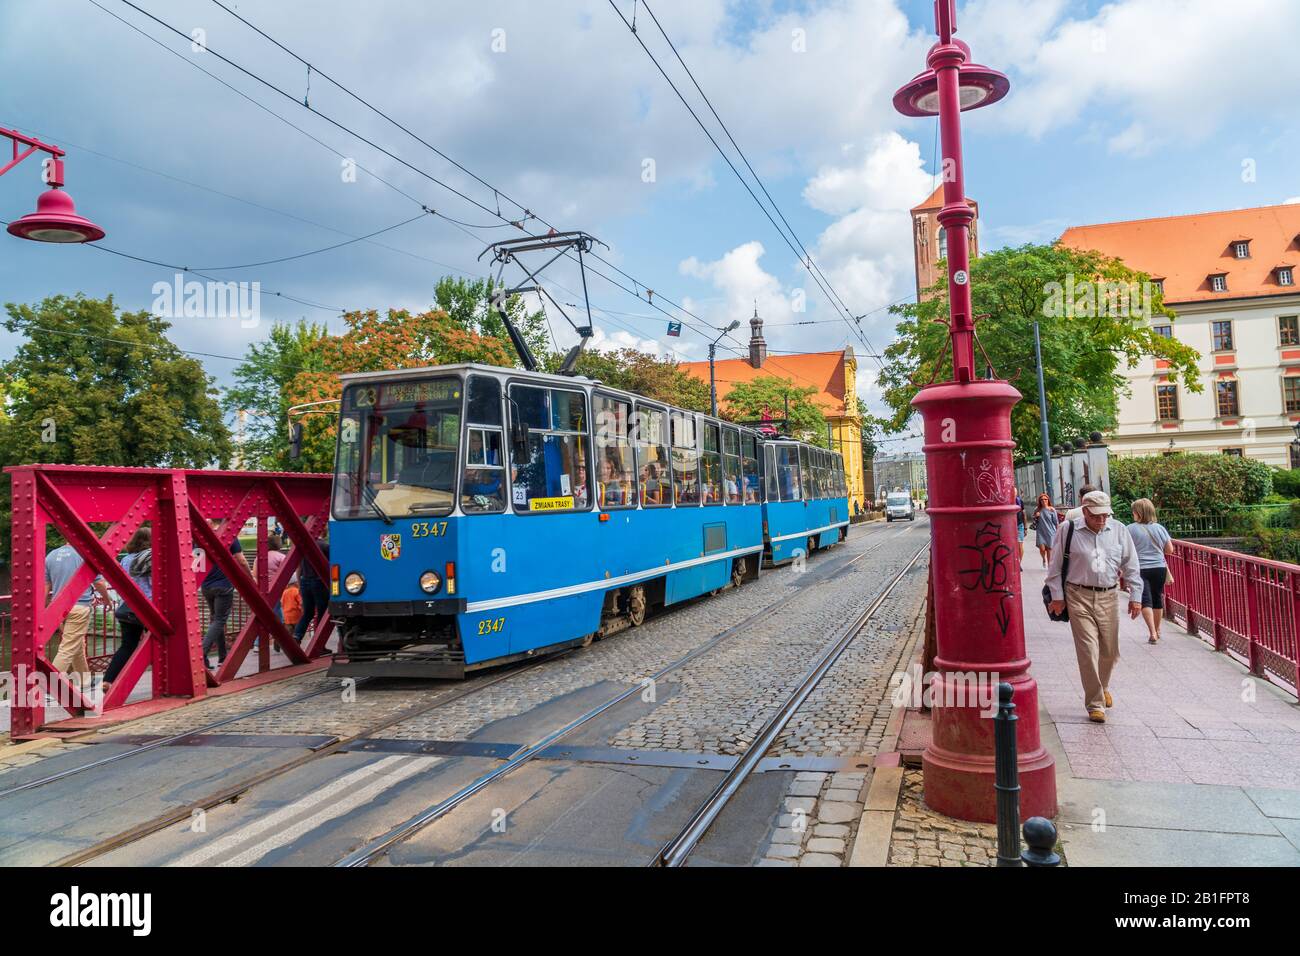 Wroclaw, Poland - August 16, 2019: Public transportation tram transporting tourists over the Sand Bridge (Most Piaskowy) to the historic center Stock Photo